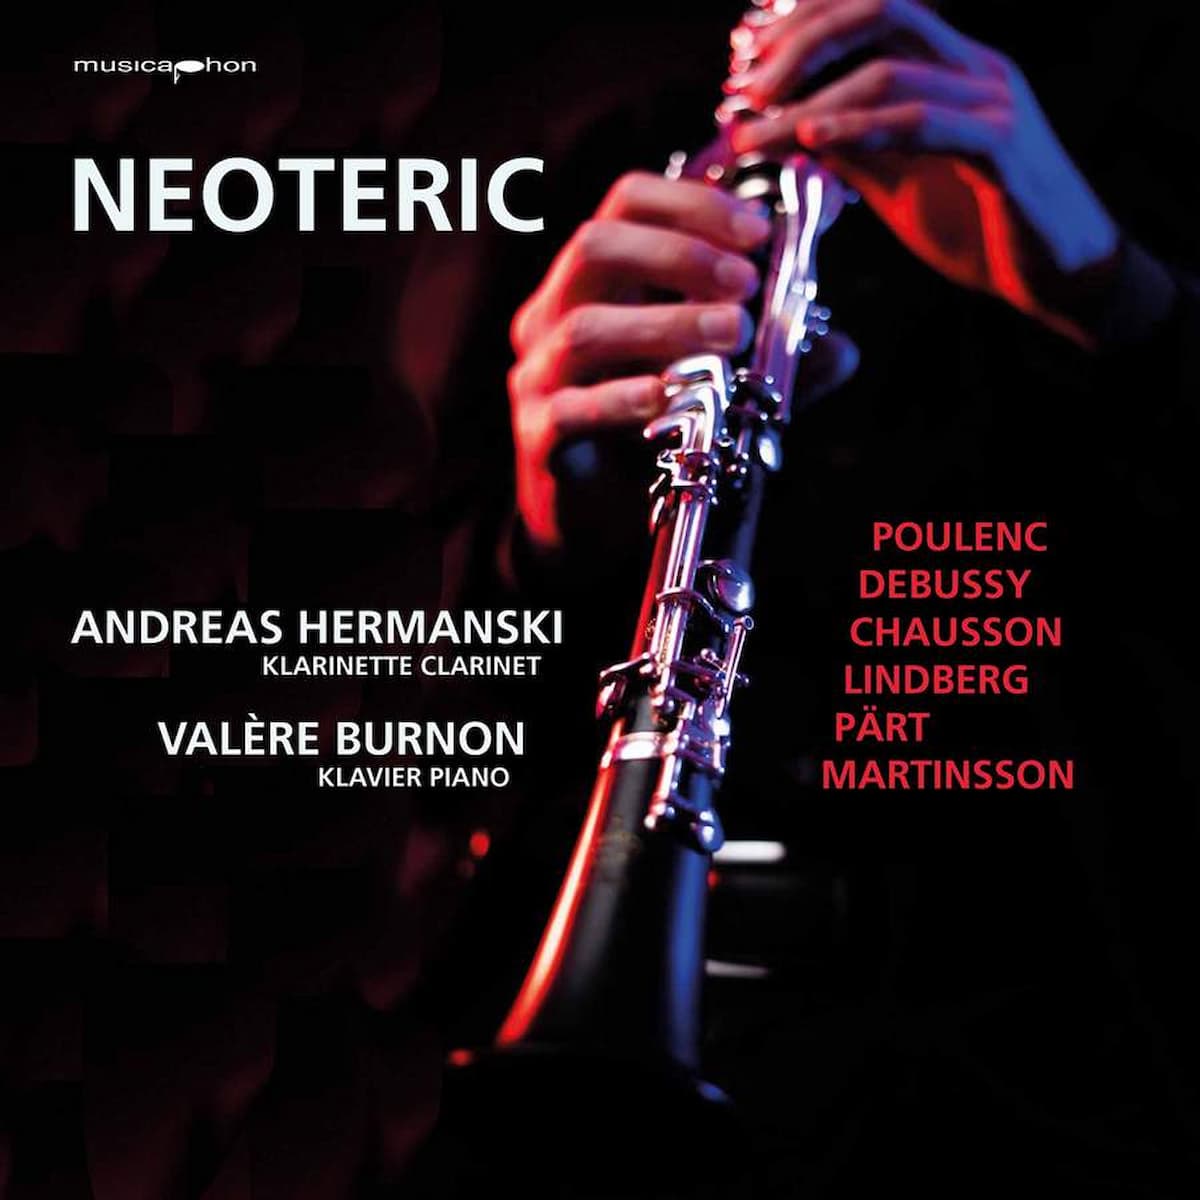 Record cover artwork for Neoteric